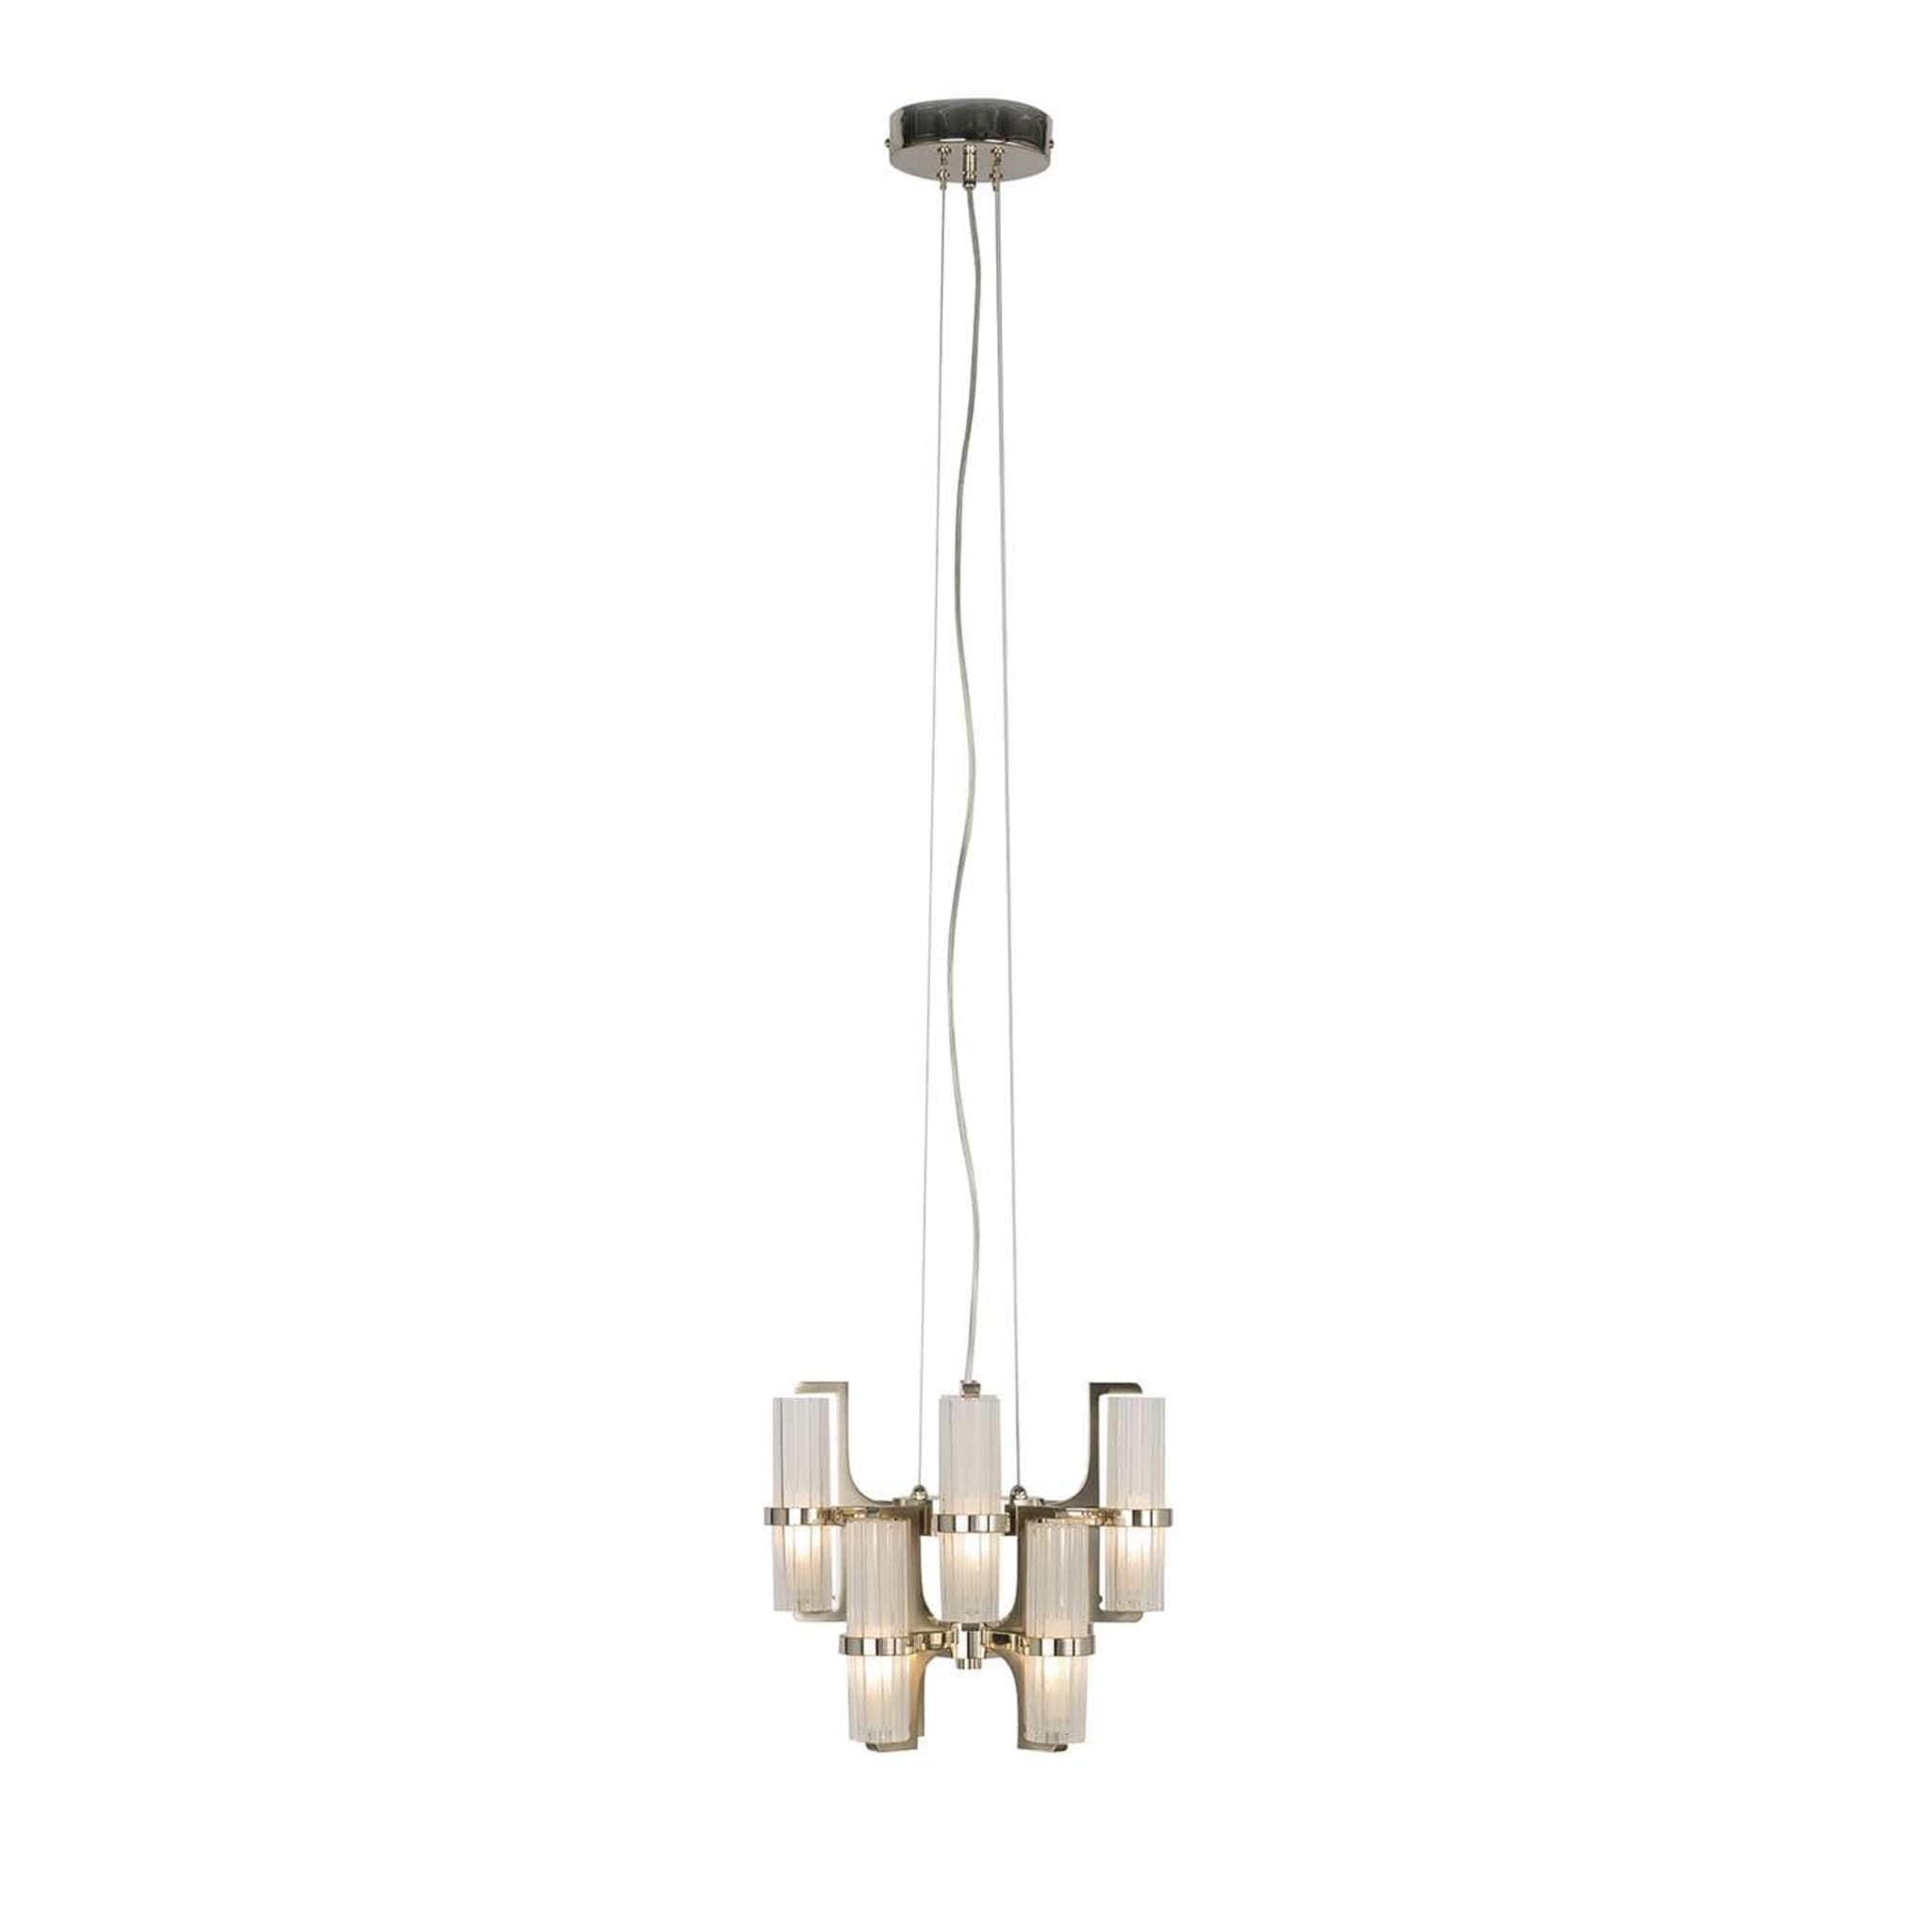 Soave Pendant Light Gold Finish by Emanuela Benedetti - Main view